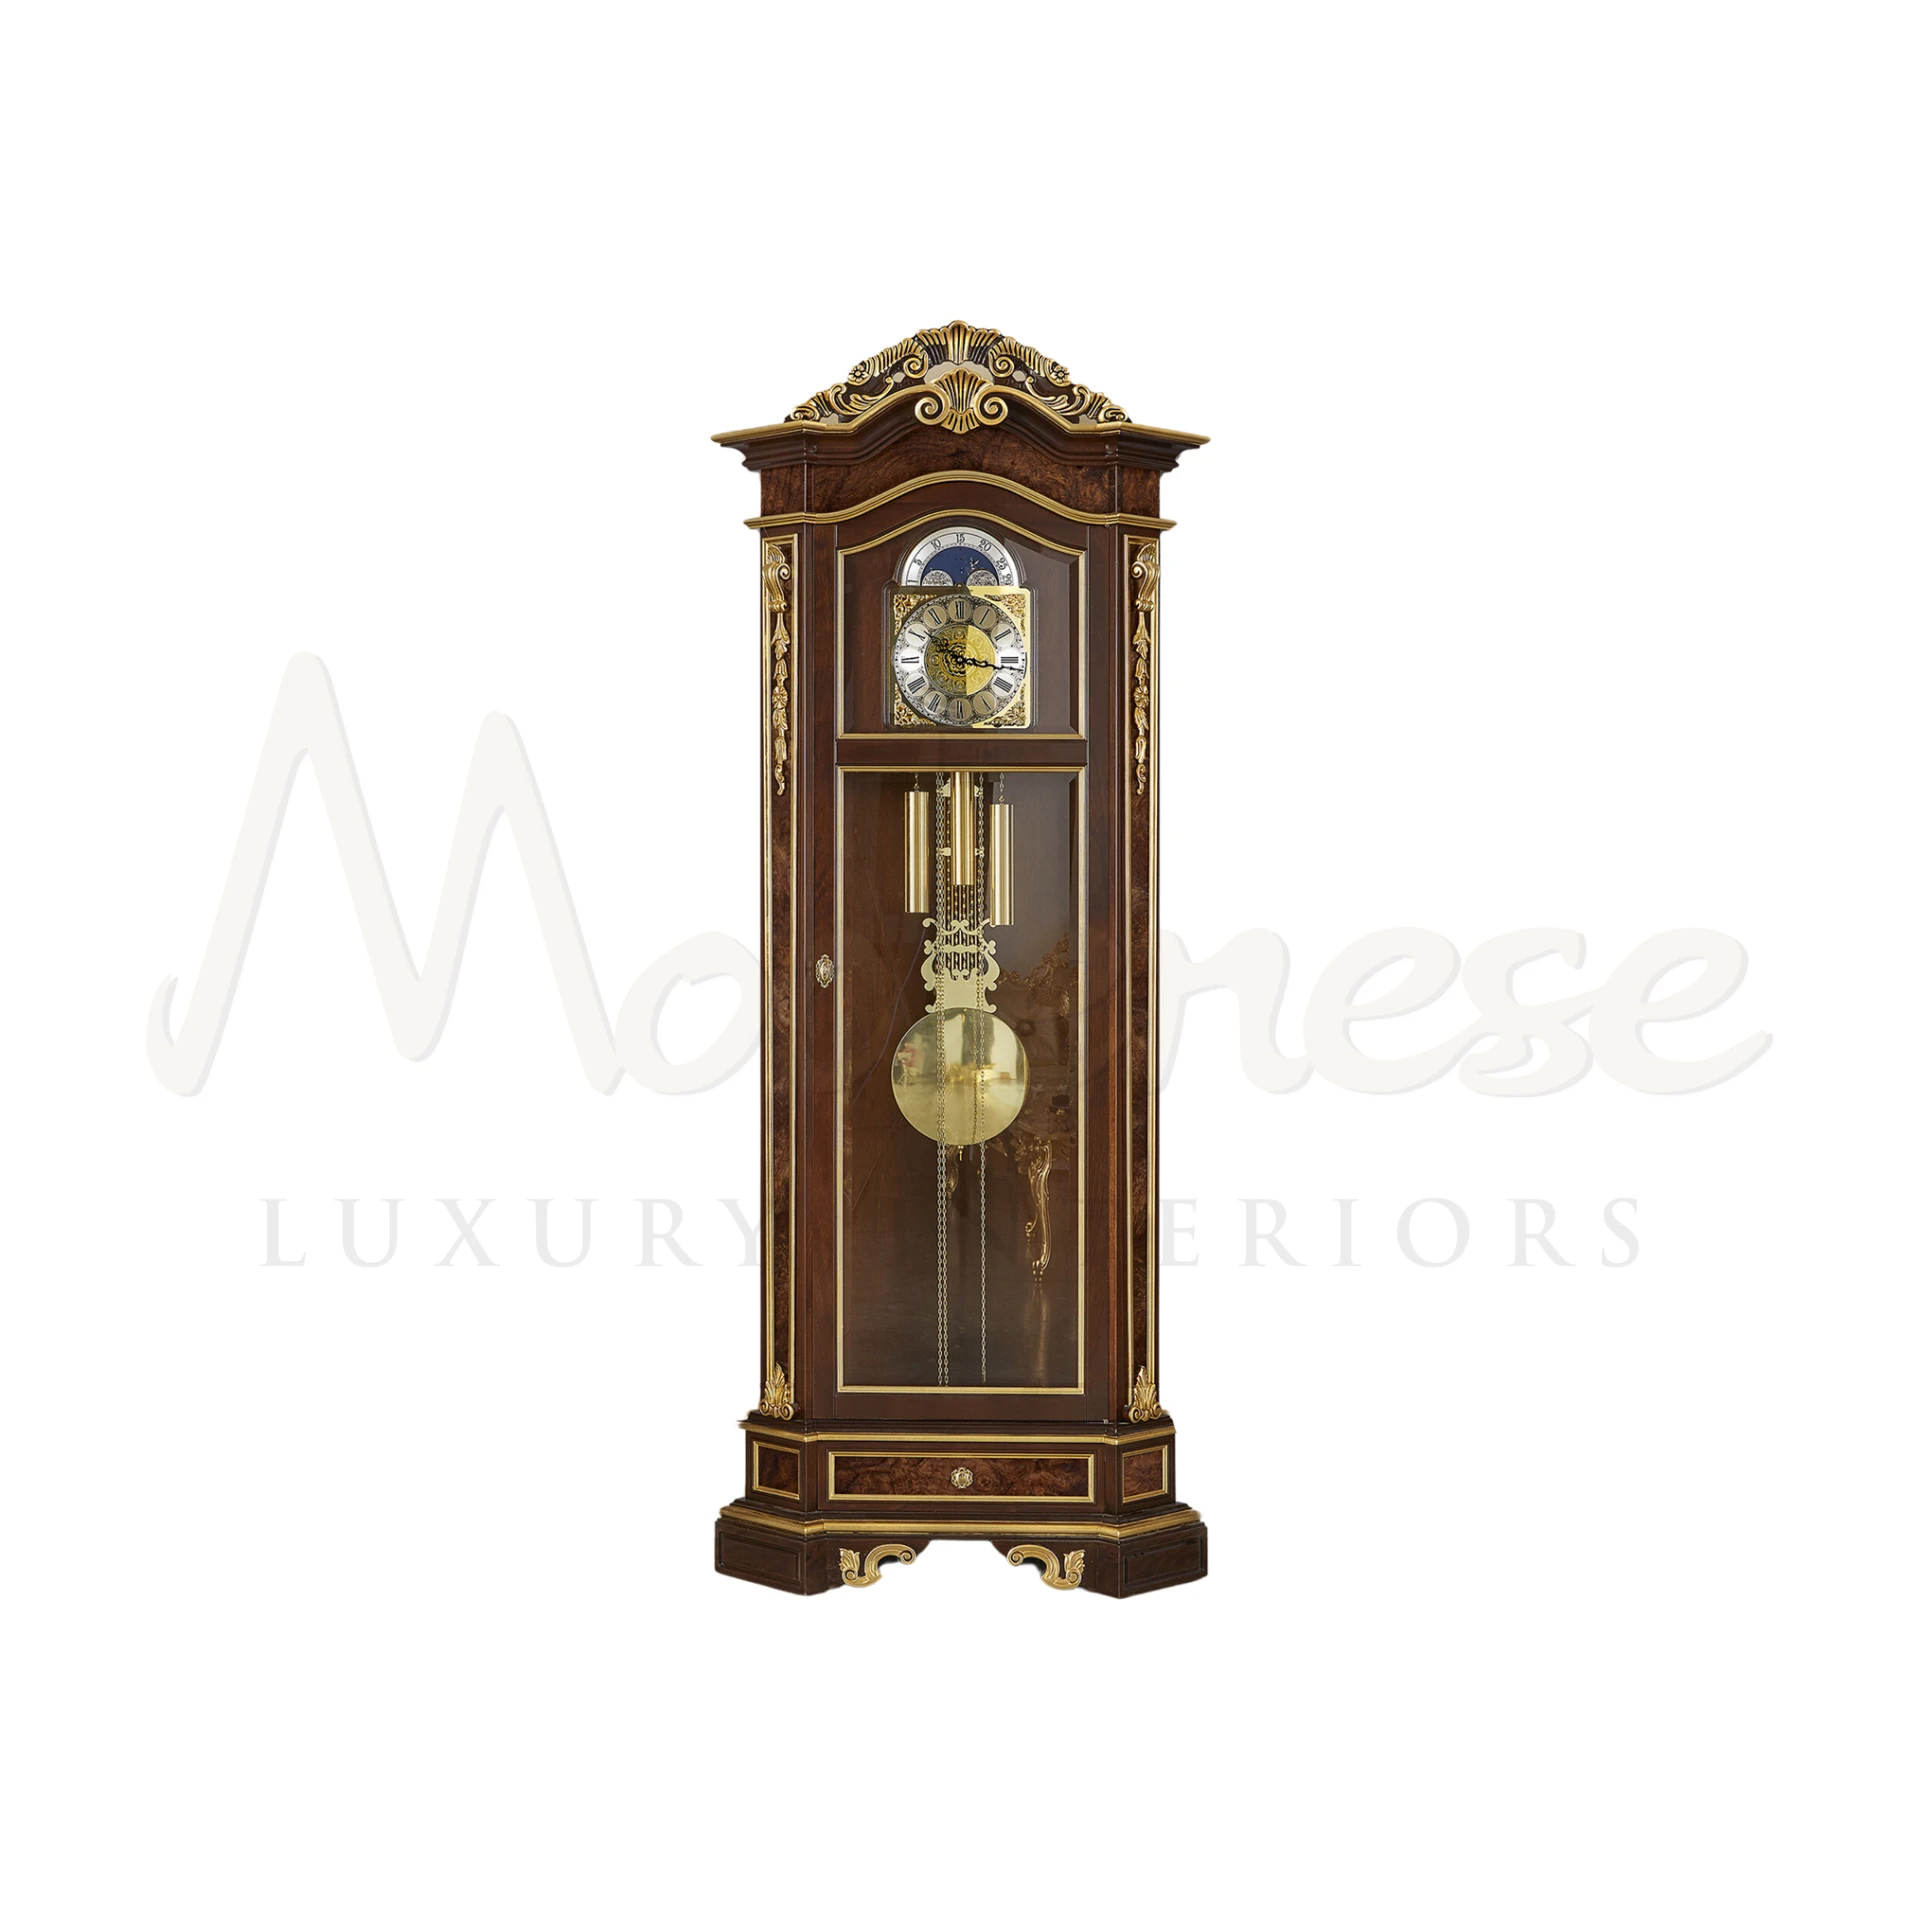 Elegant Hand-Carved Painted Grandfather Clock with bonnet pediment, a luxurious centerpiece for traditional decor.